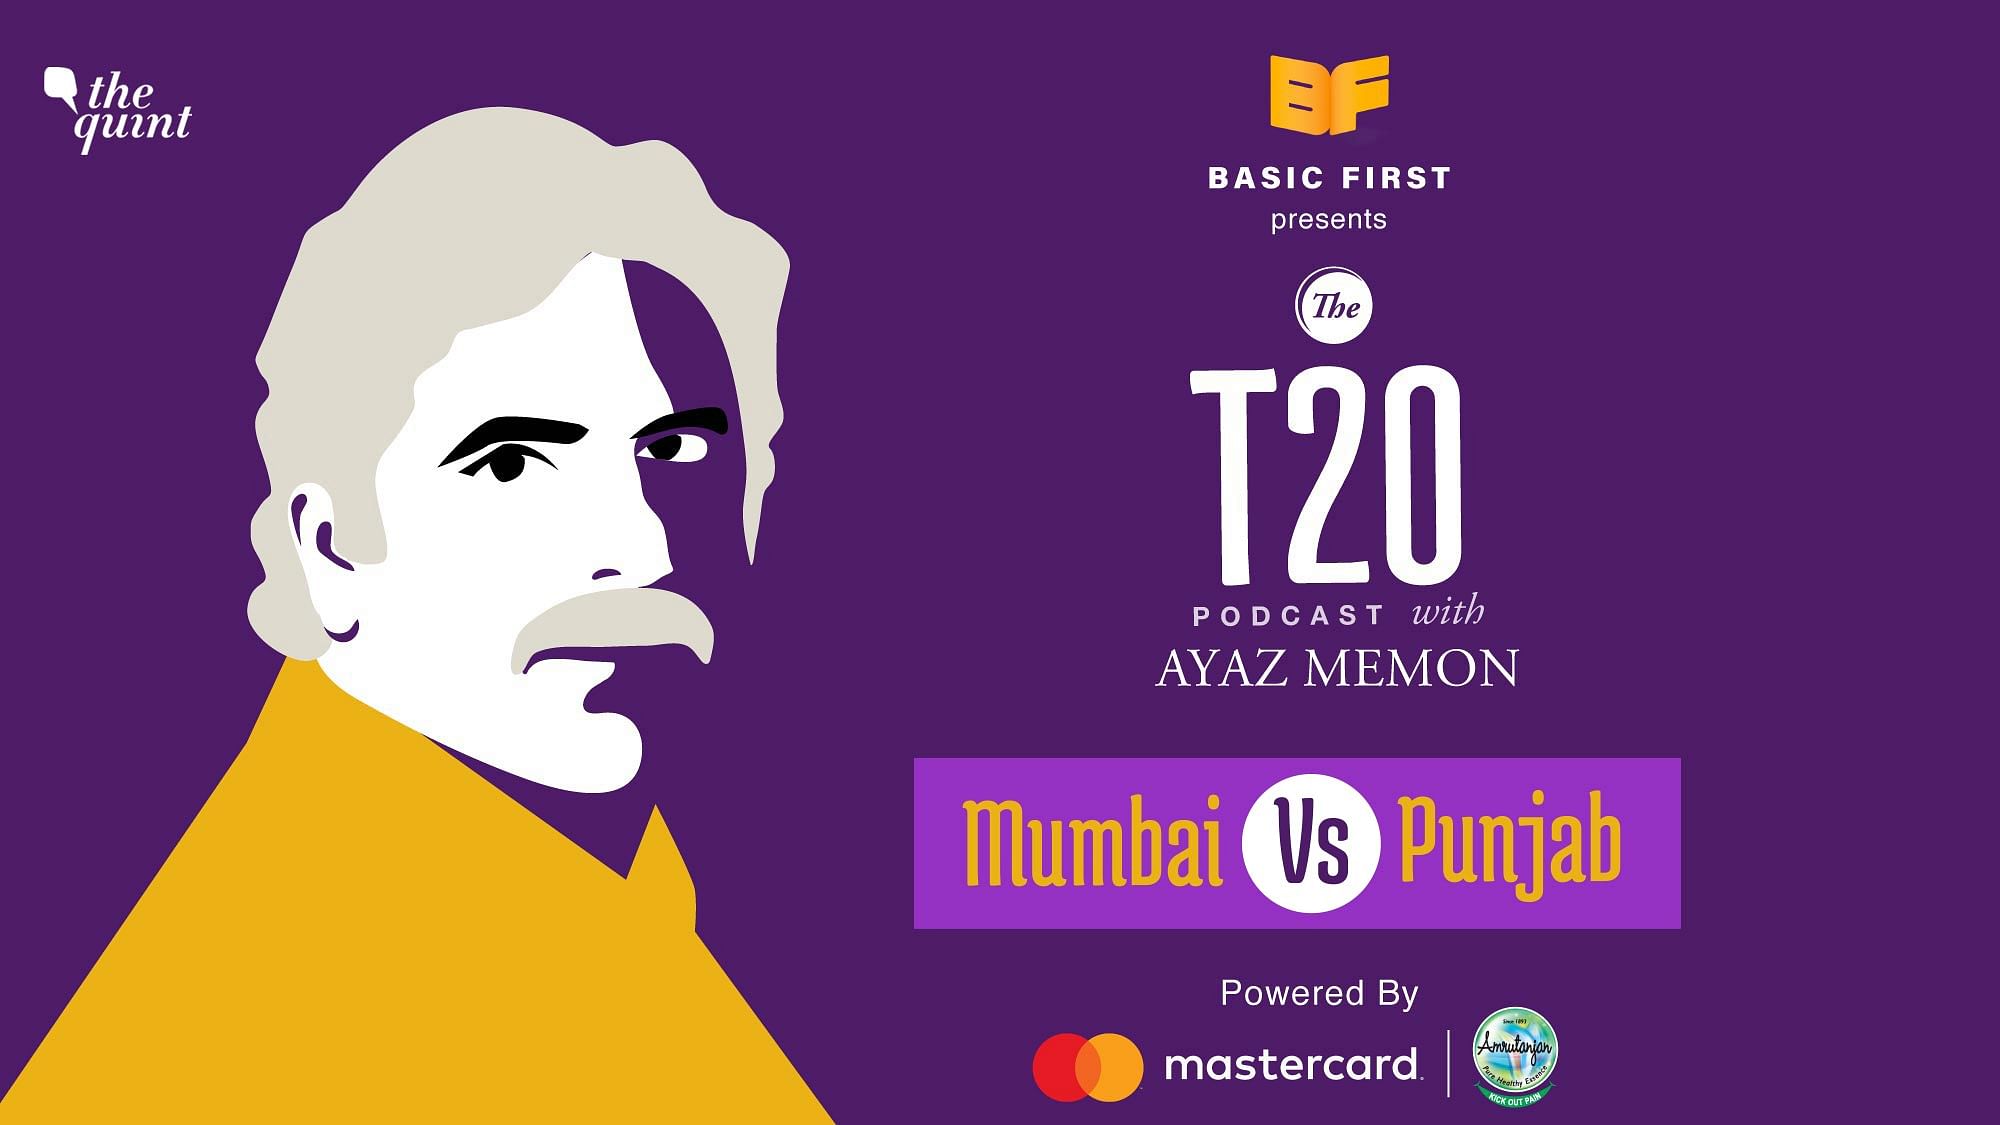 On Episode 36 of The T20 Podcast, Ayaz Memon talks about what could be the tournament’s greatest match ever.